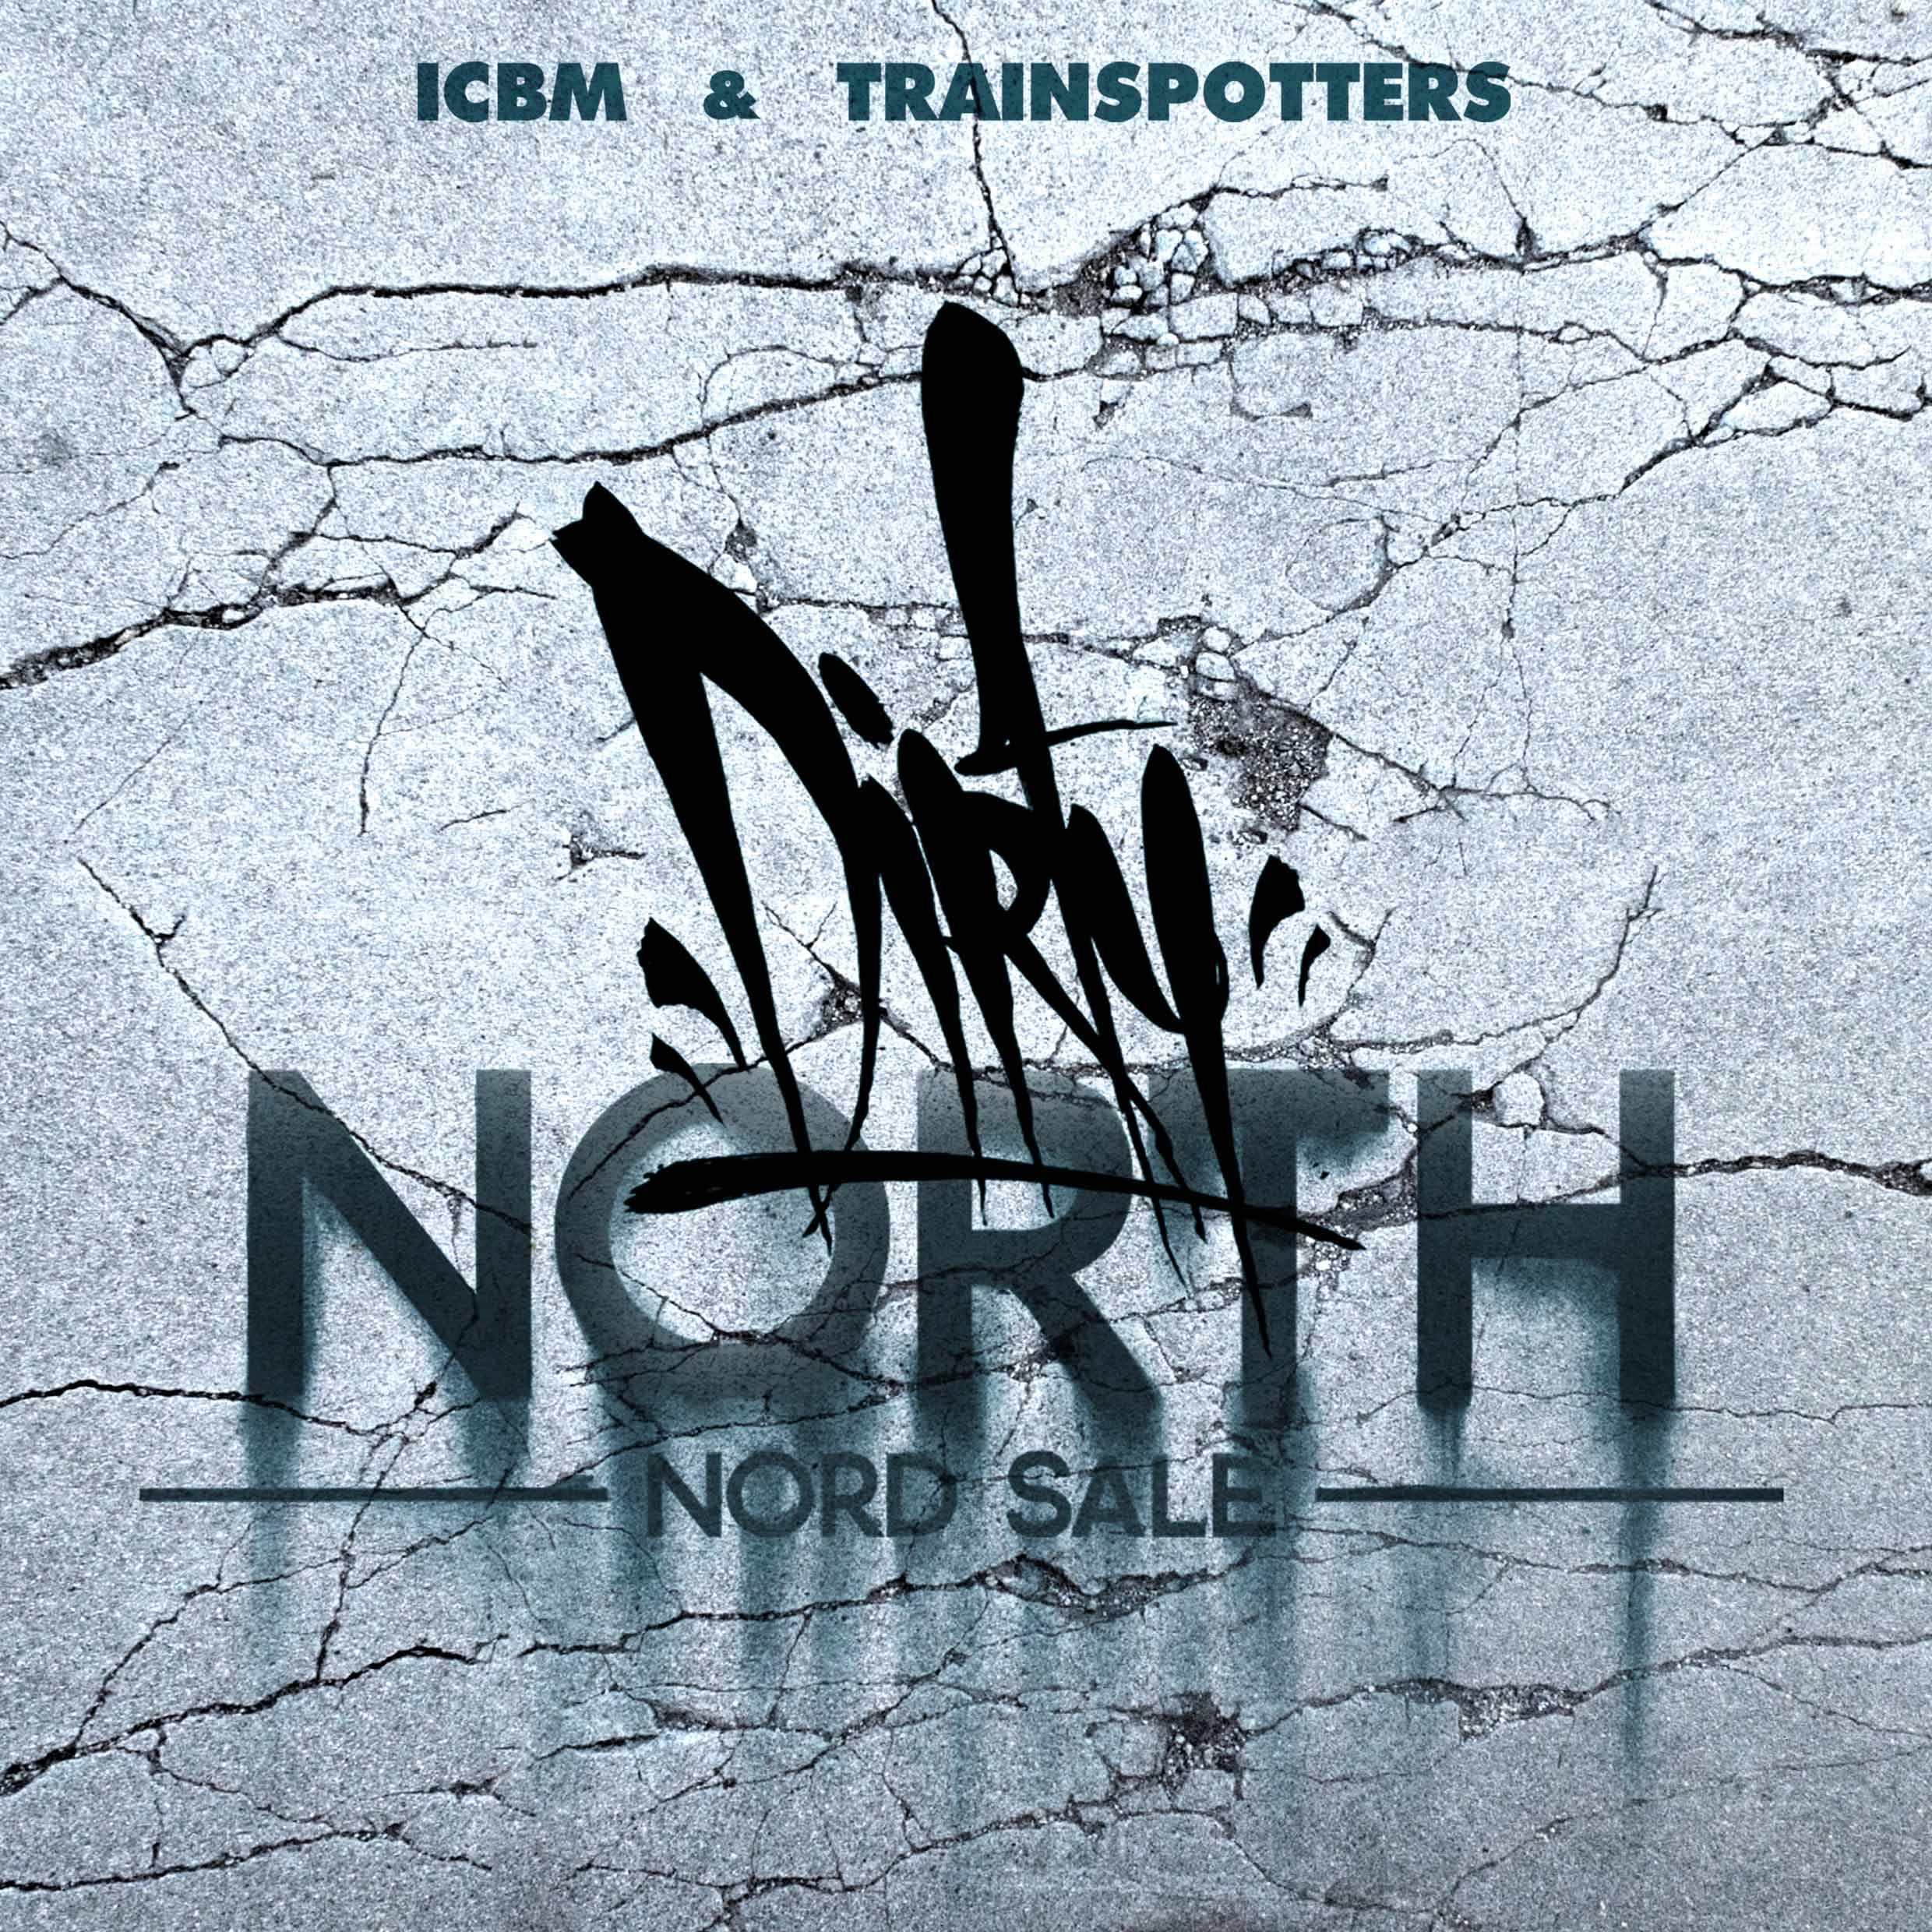 Free Download: ICBM & Trainspotters – Nord Sale Remixes (Presented by The Find Mag)